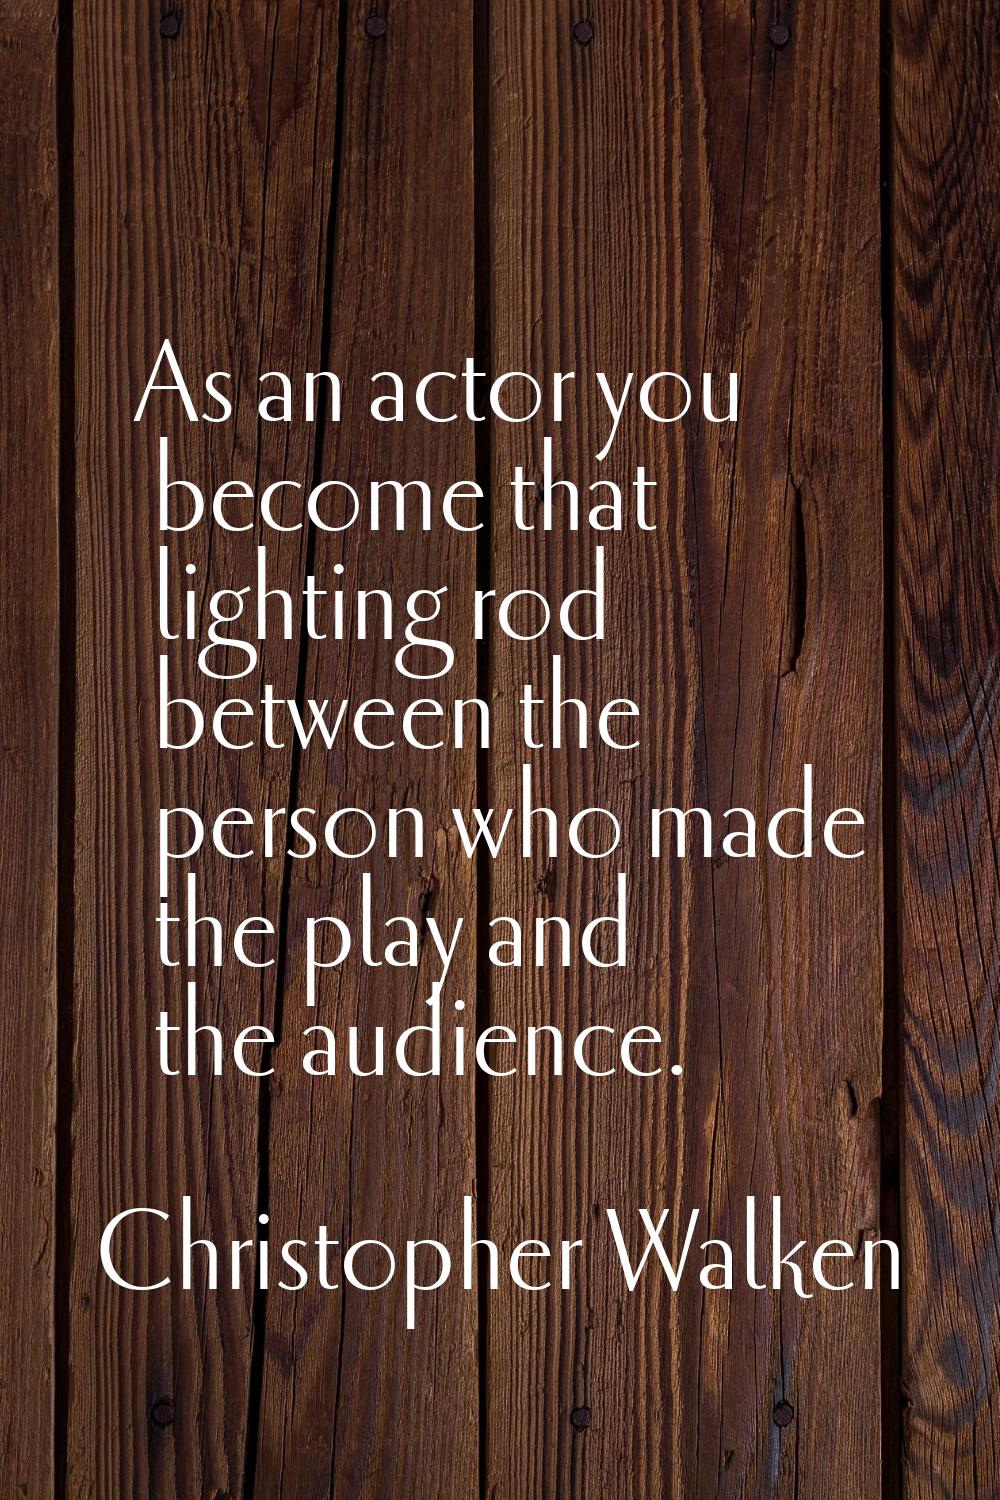 As an actor you become that lighting rod between the person who made the play and the audience.